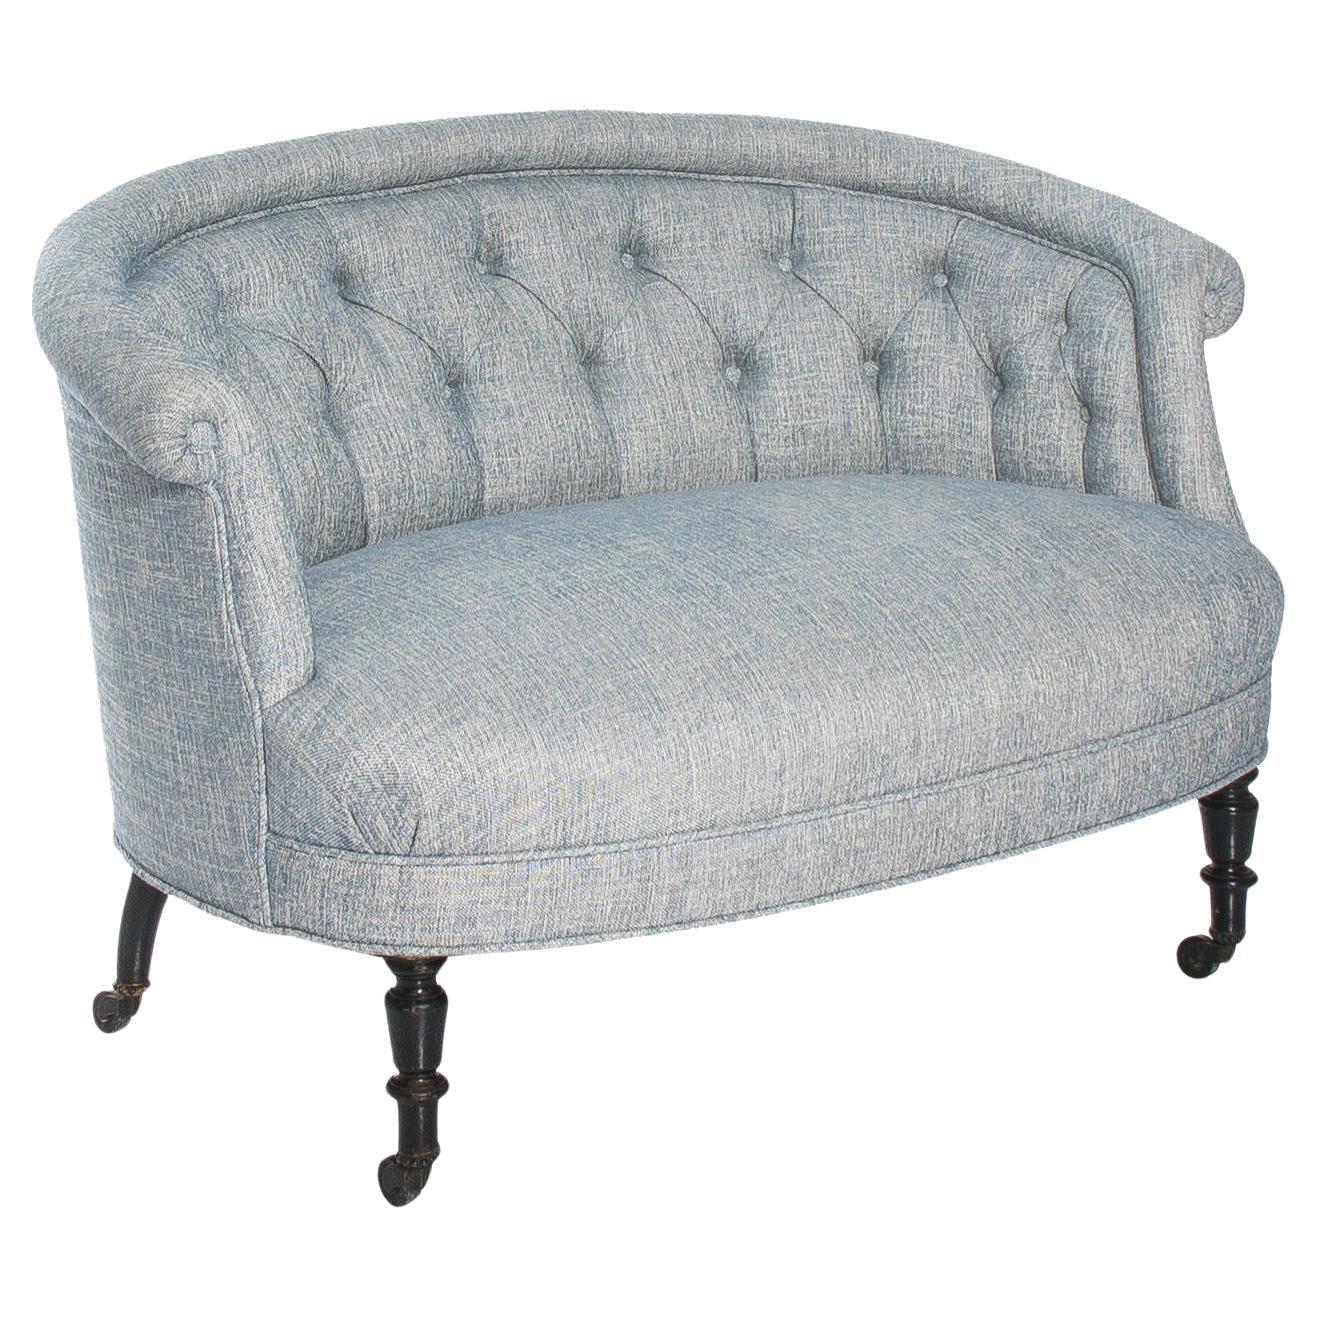 French Napoleon III Round Scroll Back Small Scale Sofa For Sale